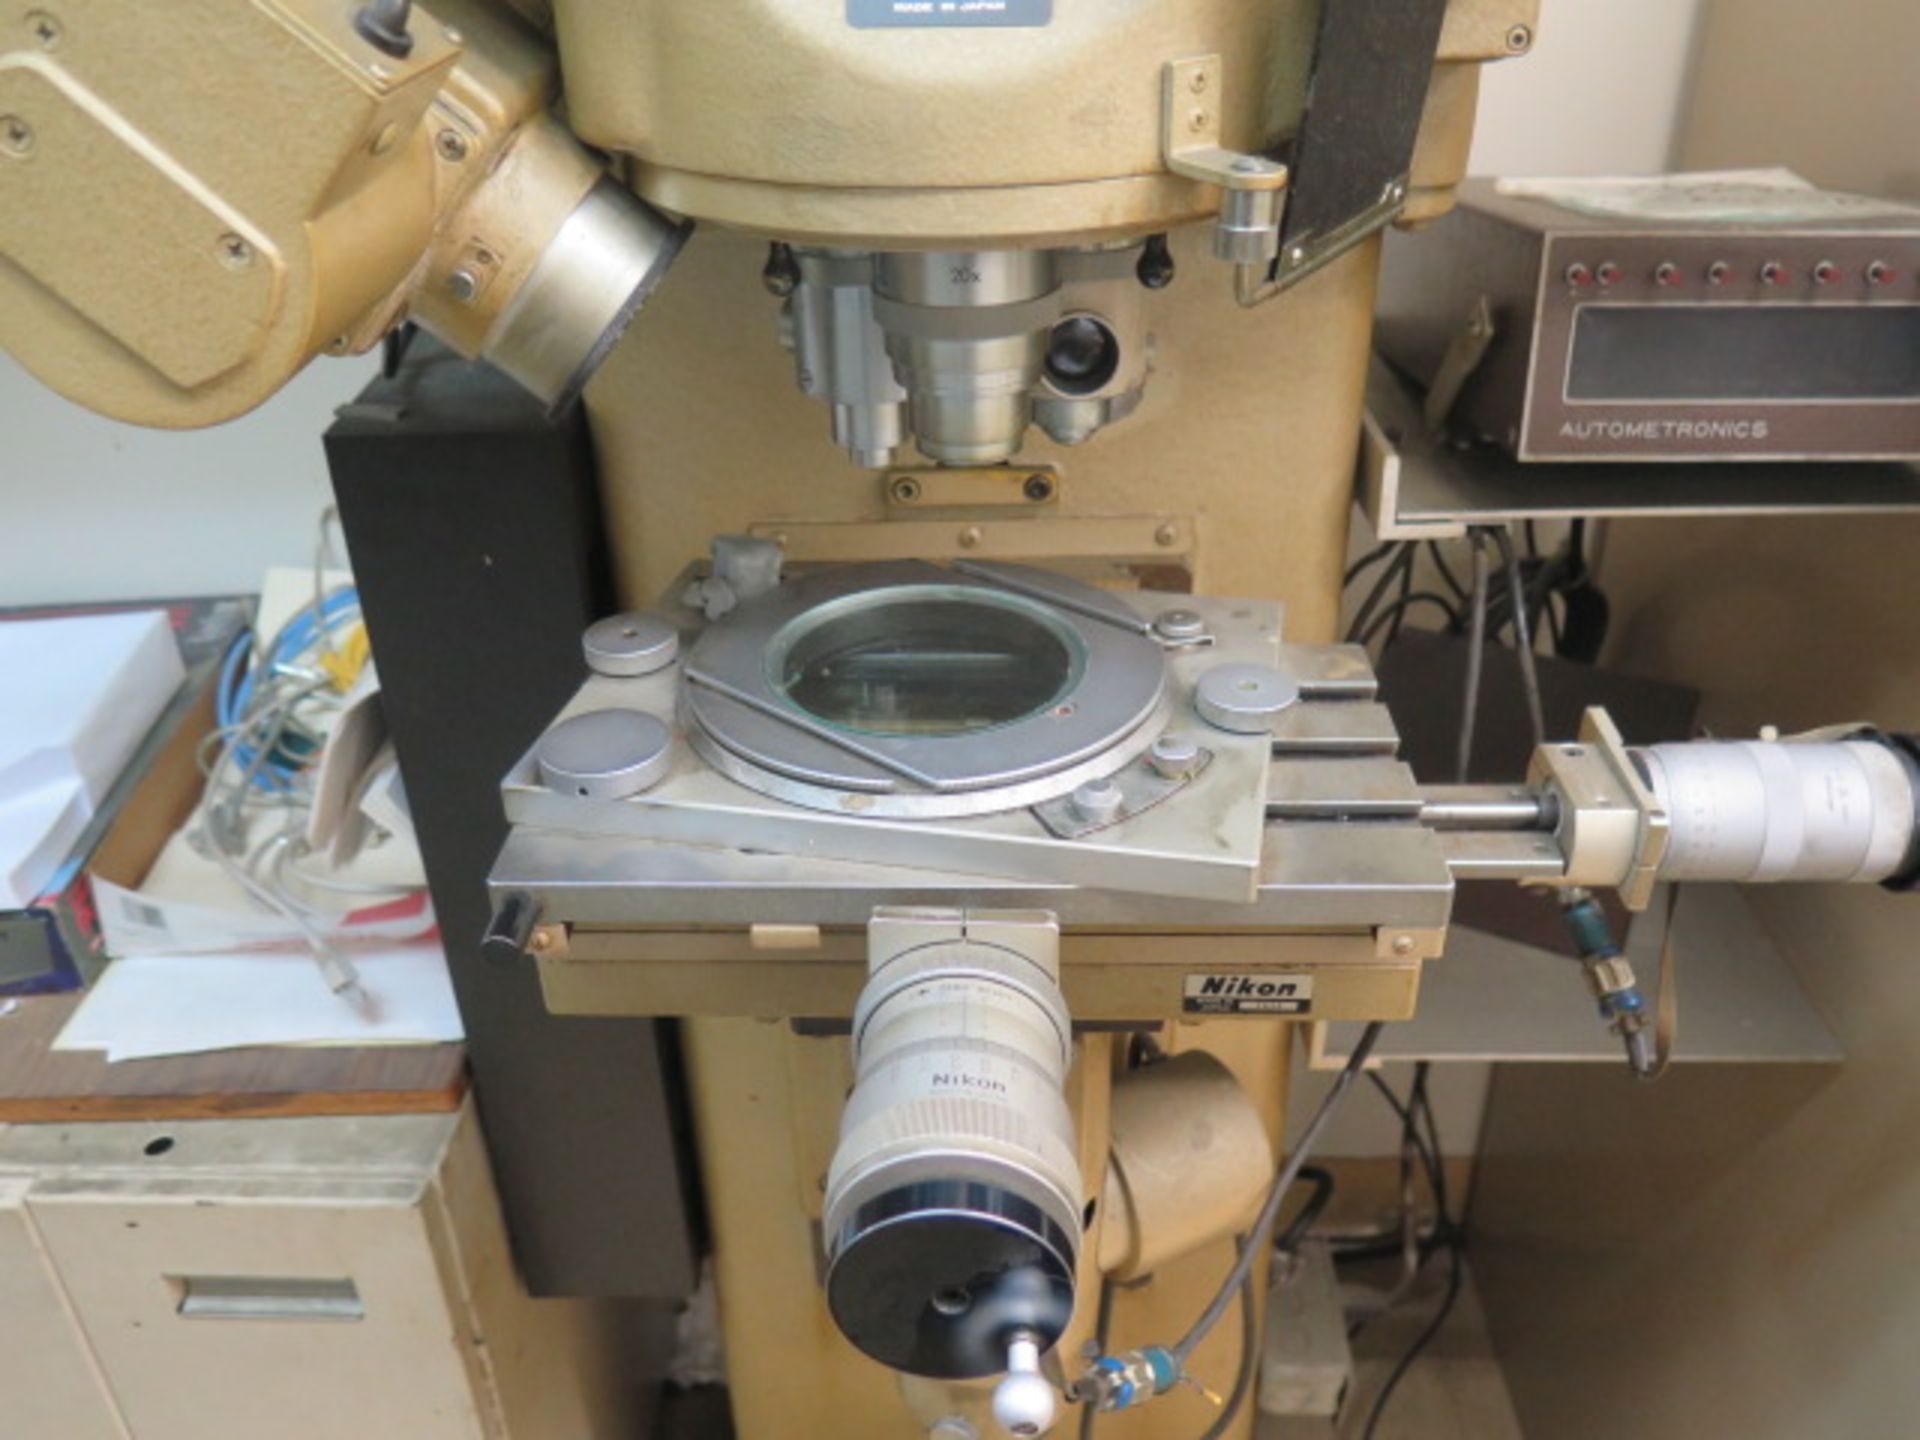 Nikon mdl. V-14 14" Optical Comparator s/n 36698 w/ Autometronics DRO, 20X, 50X and 300X, SOLD AS IS - Image 7 of 13